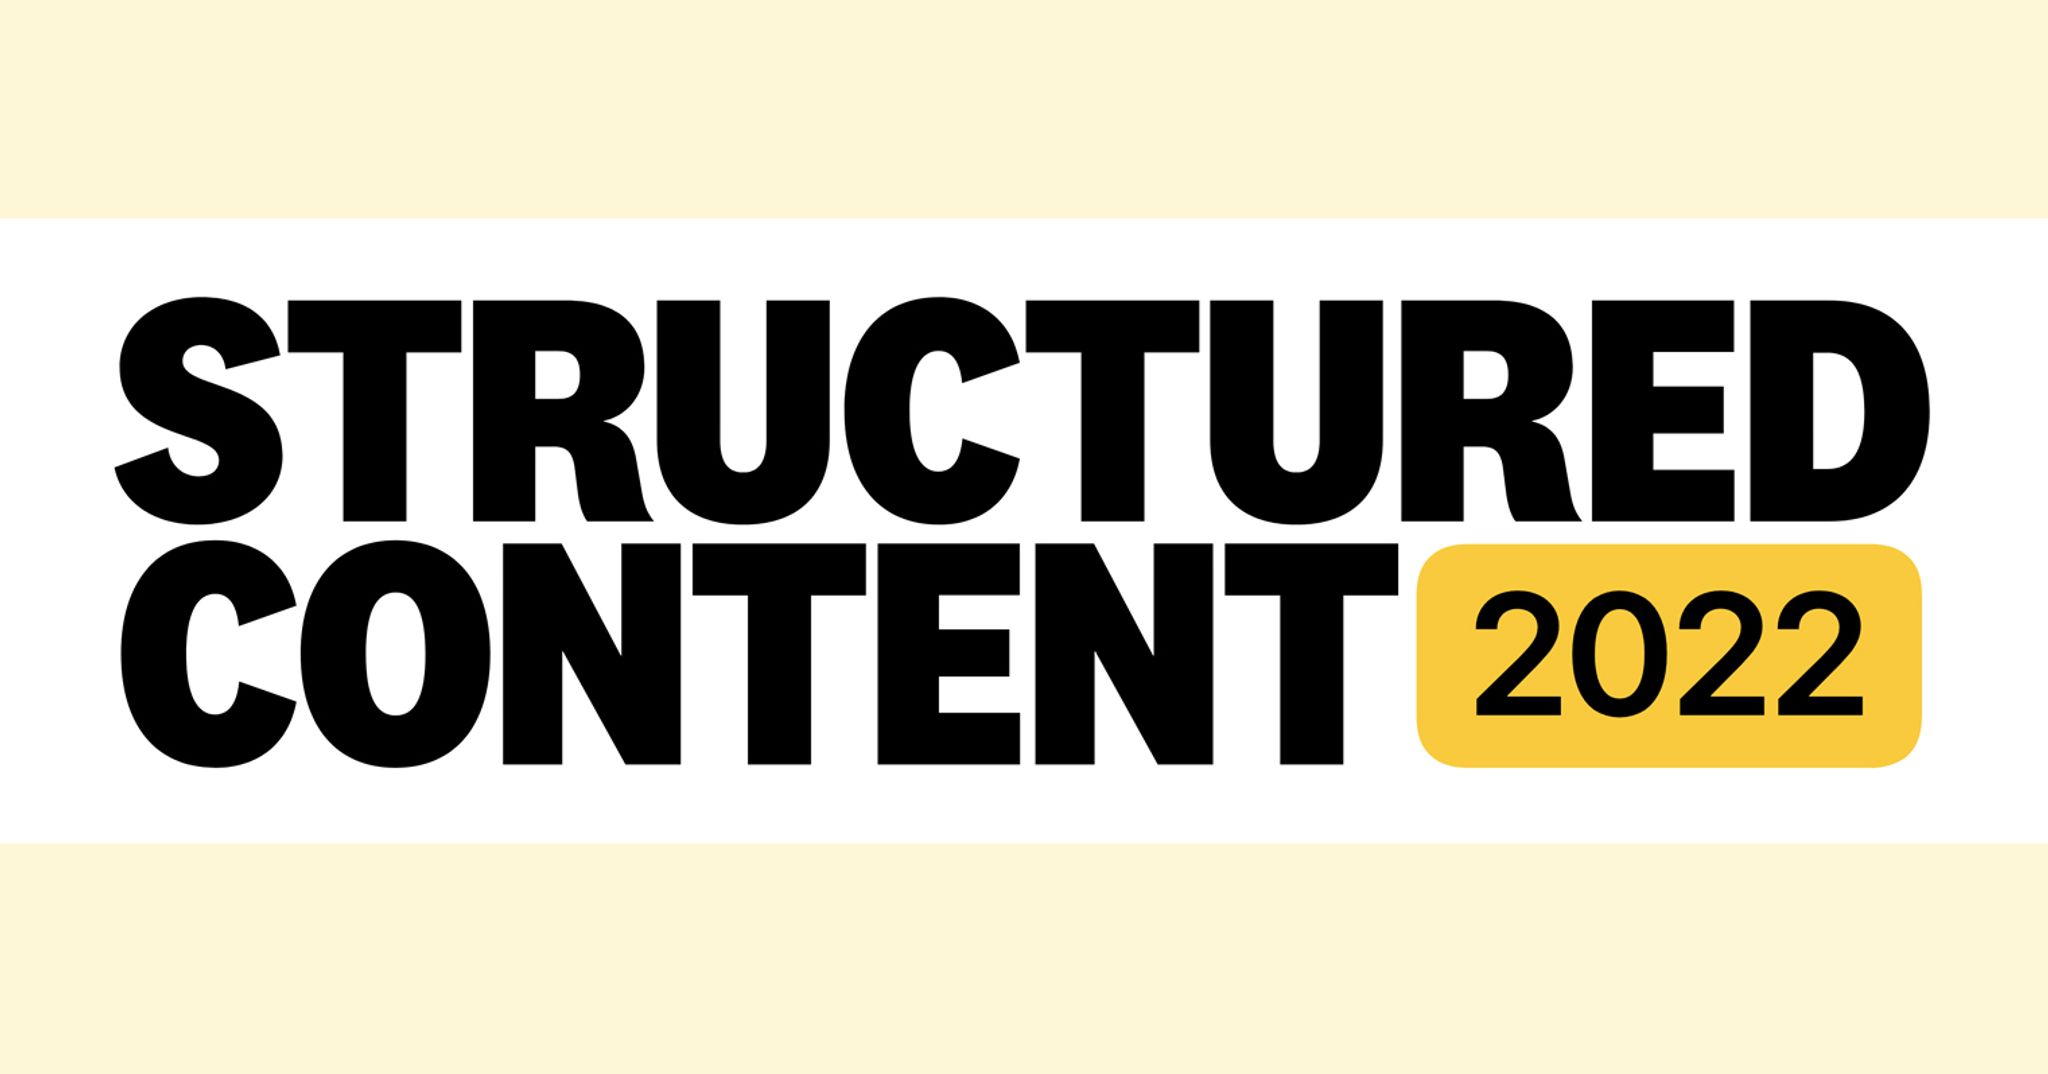 Image of Structured Content logo against yellow background